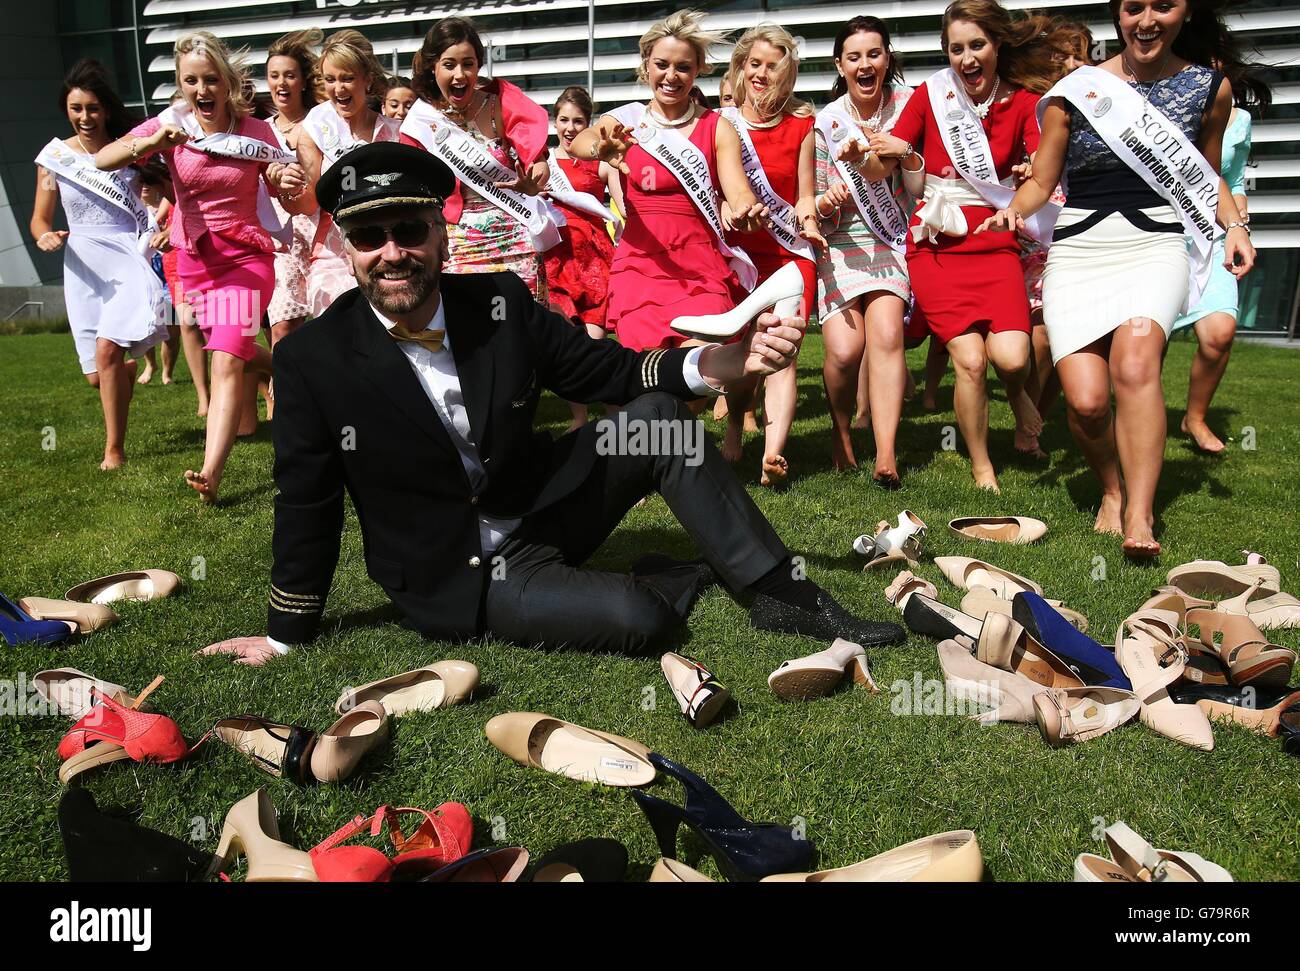 Host Daithi O Se with the 32 Irish and International Roses taking part in the 2014 International Rose Selection at the launch of this years Rose of Tralee Festival at Dublin Airport. Stock Photo